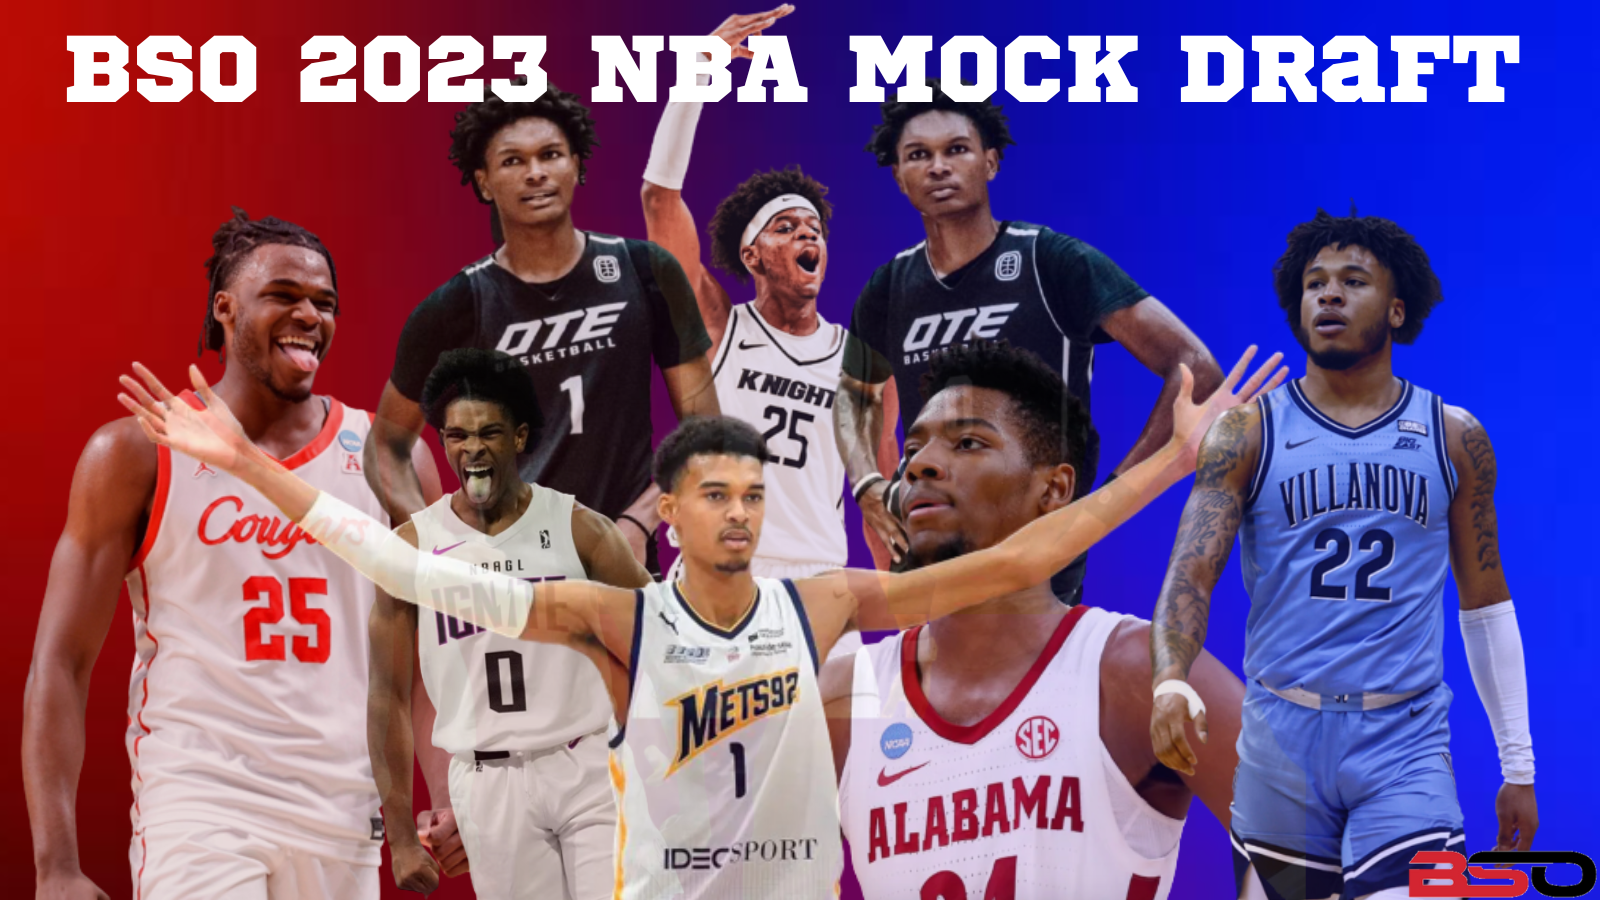 BSO 2023 NBA Mock Draft: Is Victor Wembanyama The Only Projected Superstar In The 2023 NBA Draft Class Or Do They Have Quite A Few Guys With Superstar Potential?